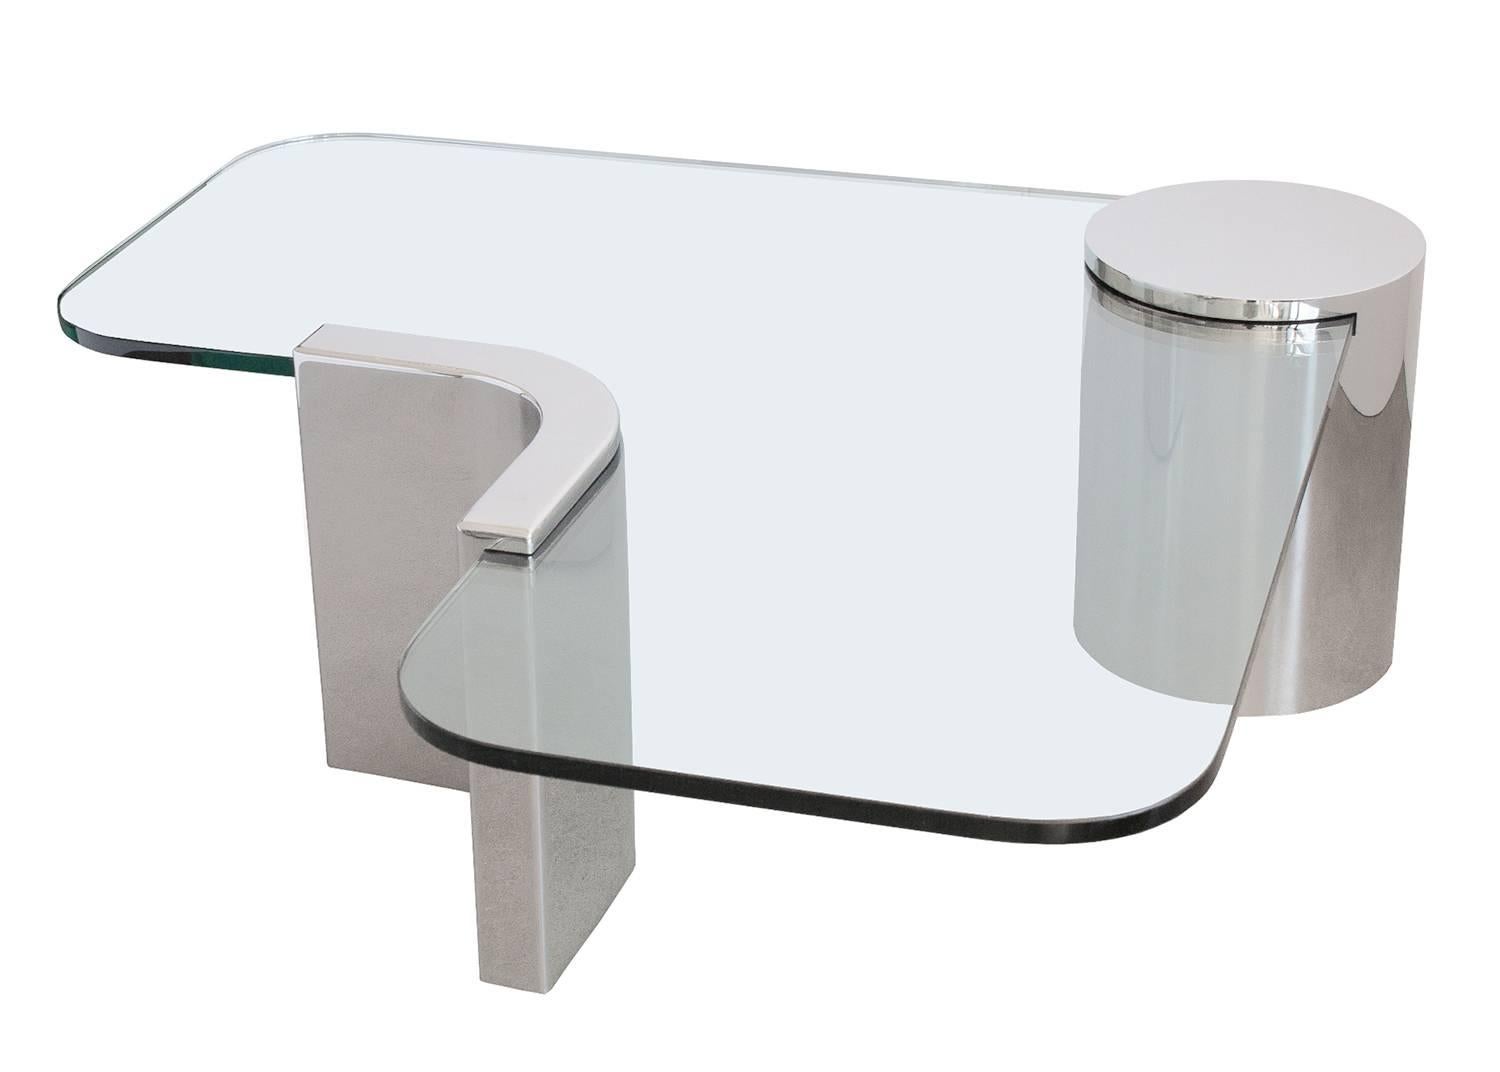 Unique and sculptural cantilevered coffee table in the style of J Wade Beam for Brueton / Pace Collection. A 3/4